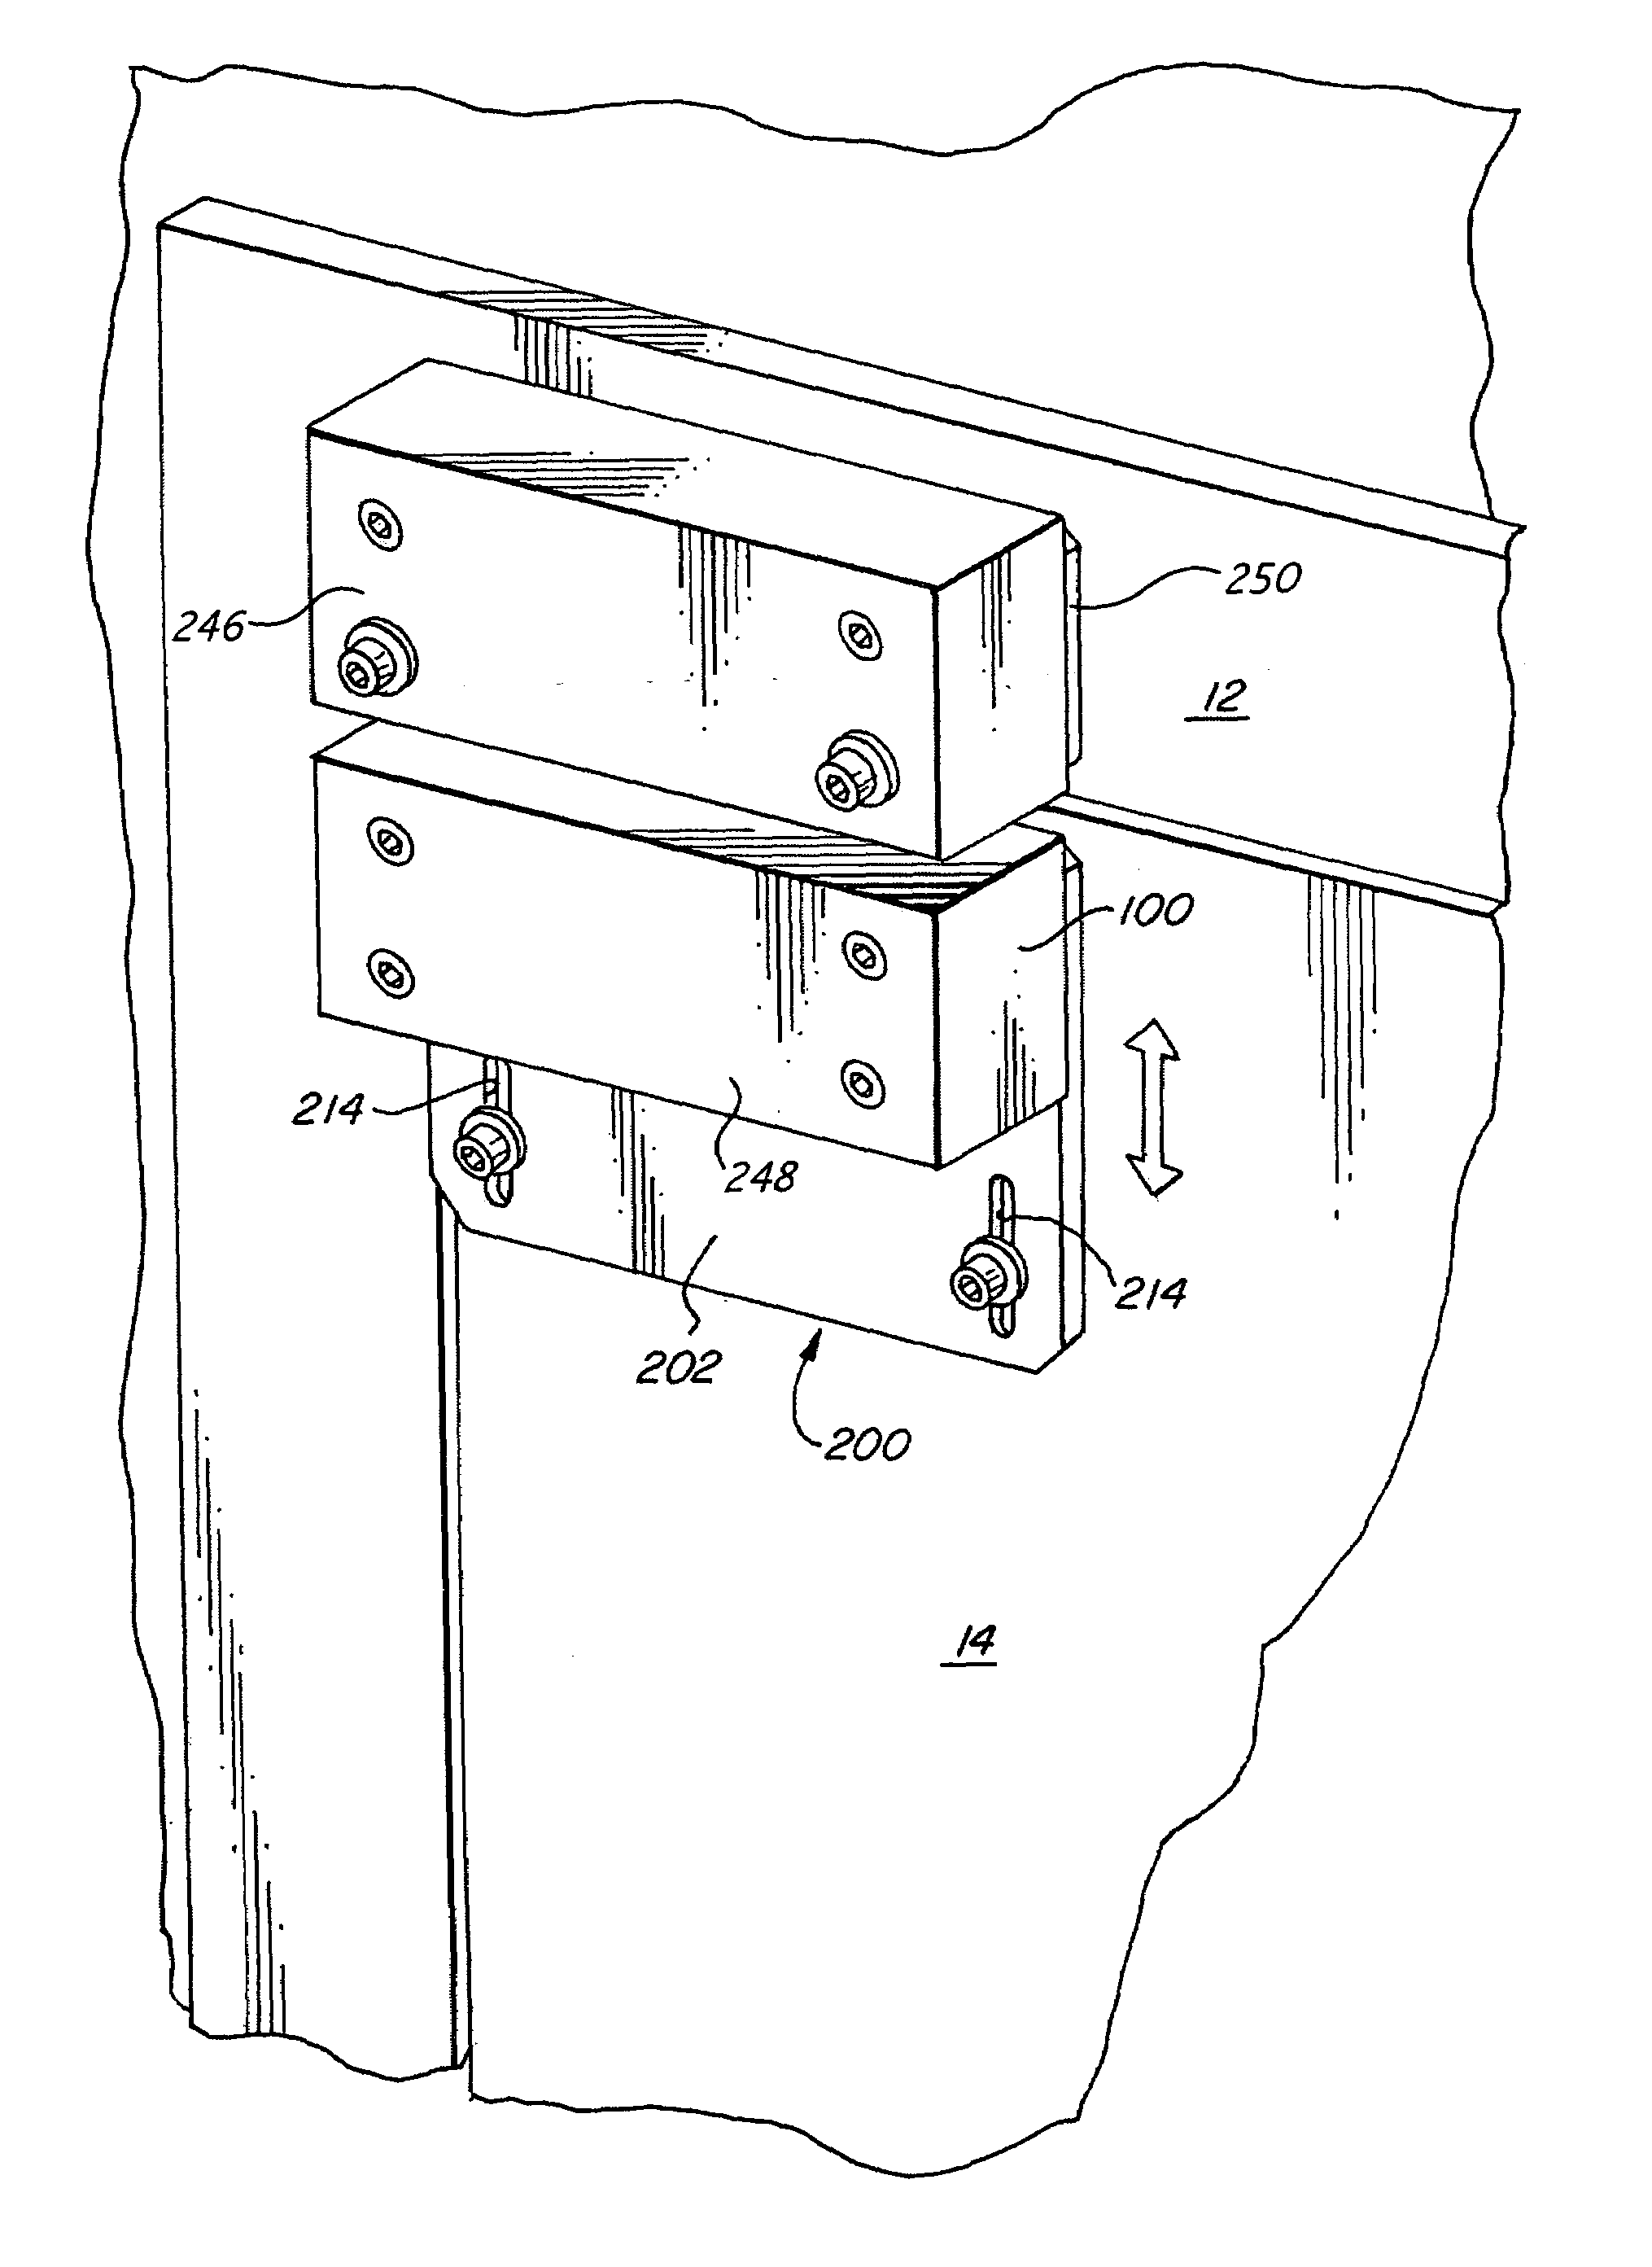 Mounting bracket for a security device